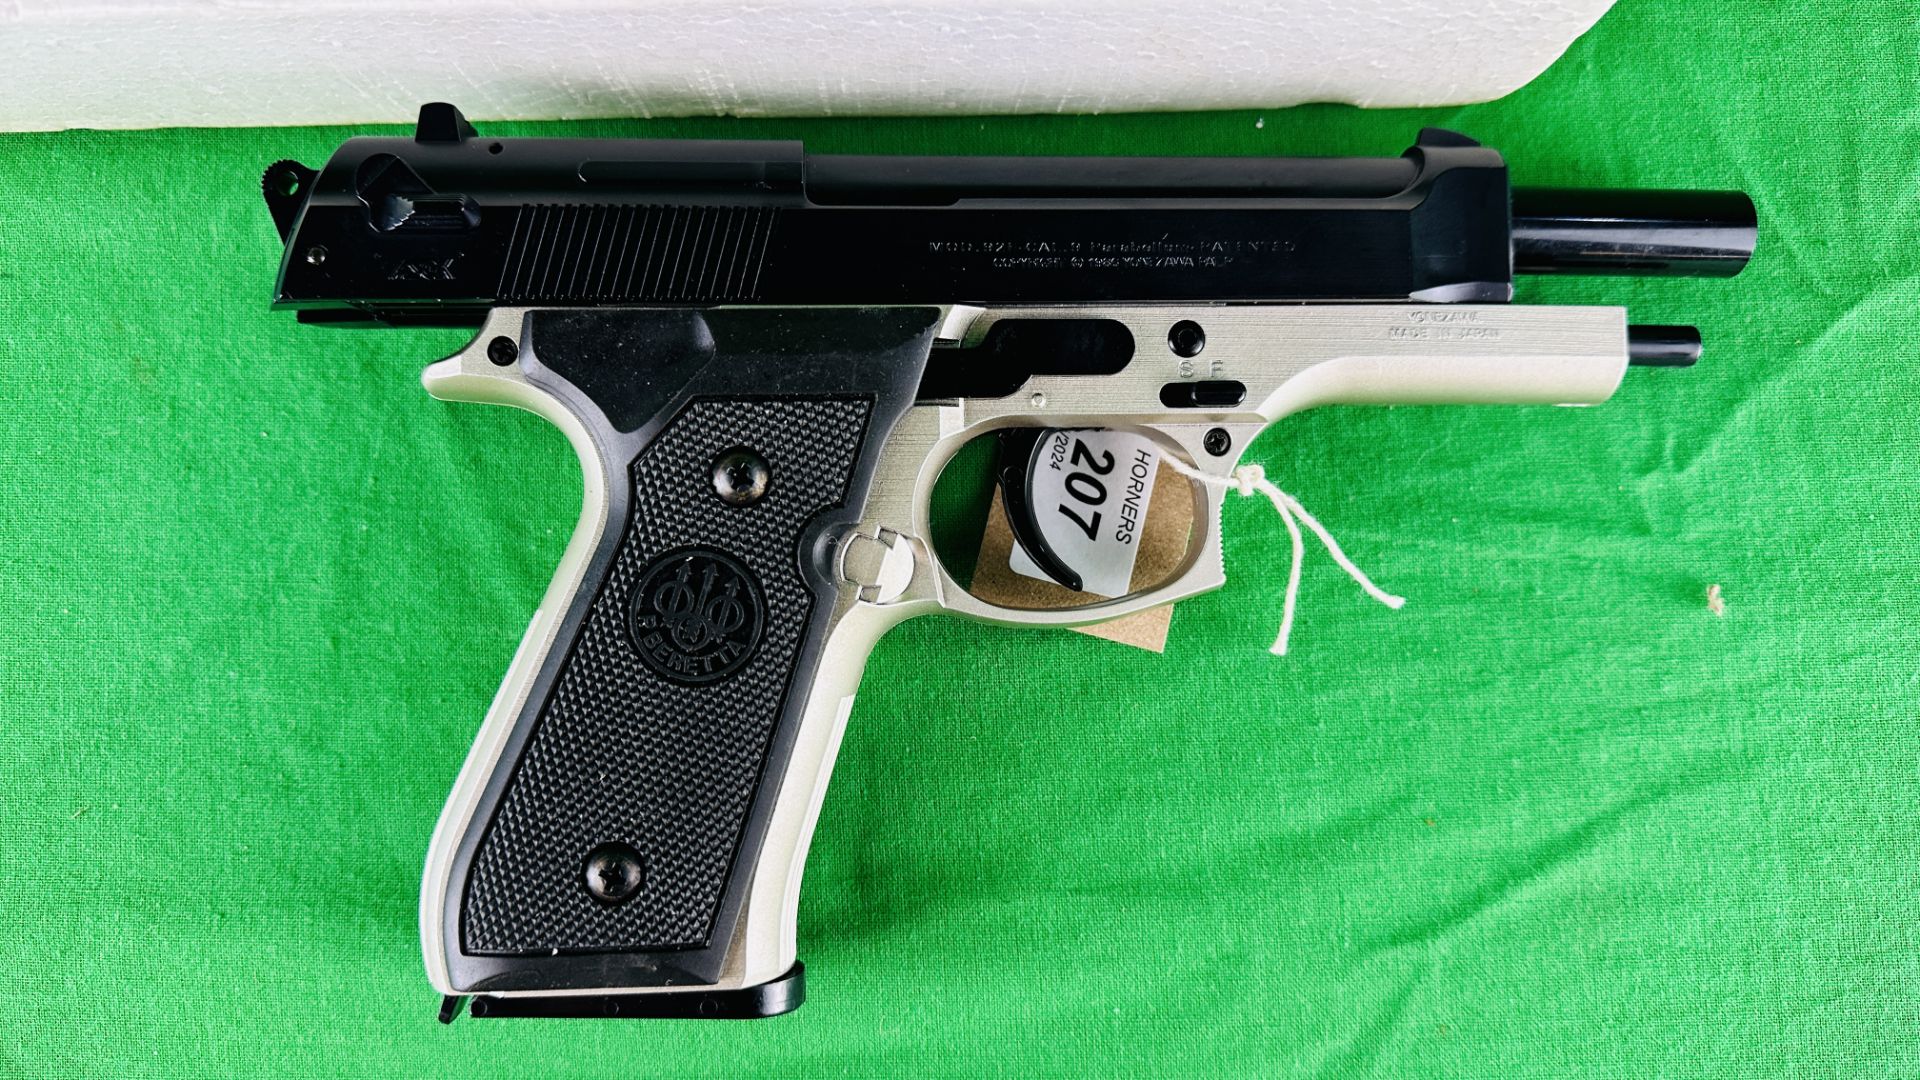 M92F BERETTA 40MM CASTON BB GUN IN ORIGINAL BOX - NO POSTAGE OR PACKING AVAILABLE. - Image 7 of 7